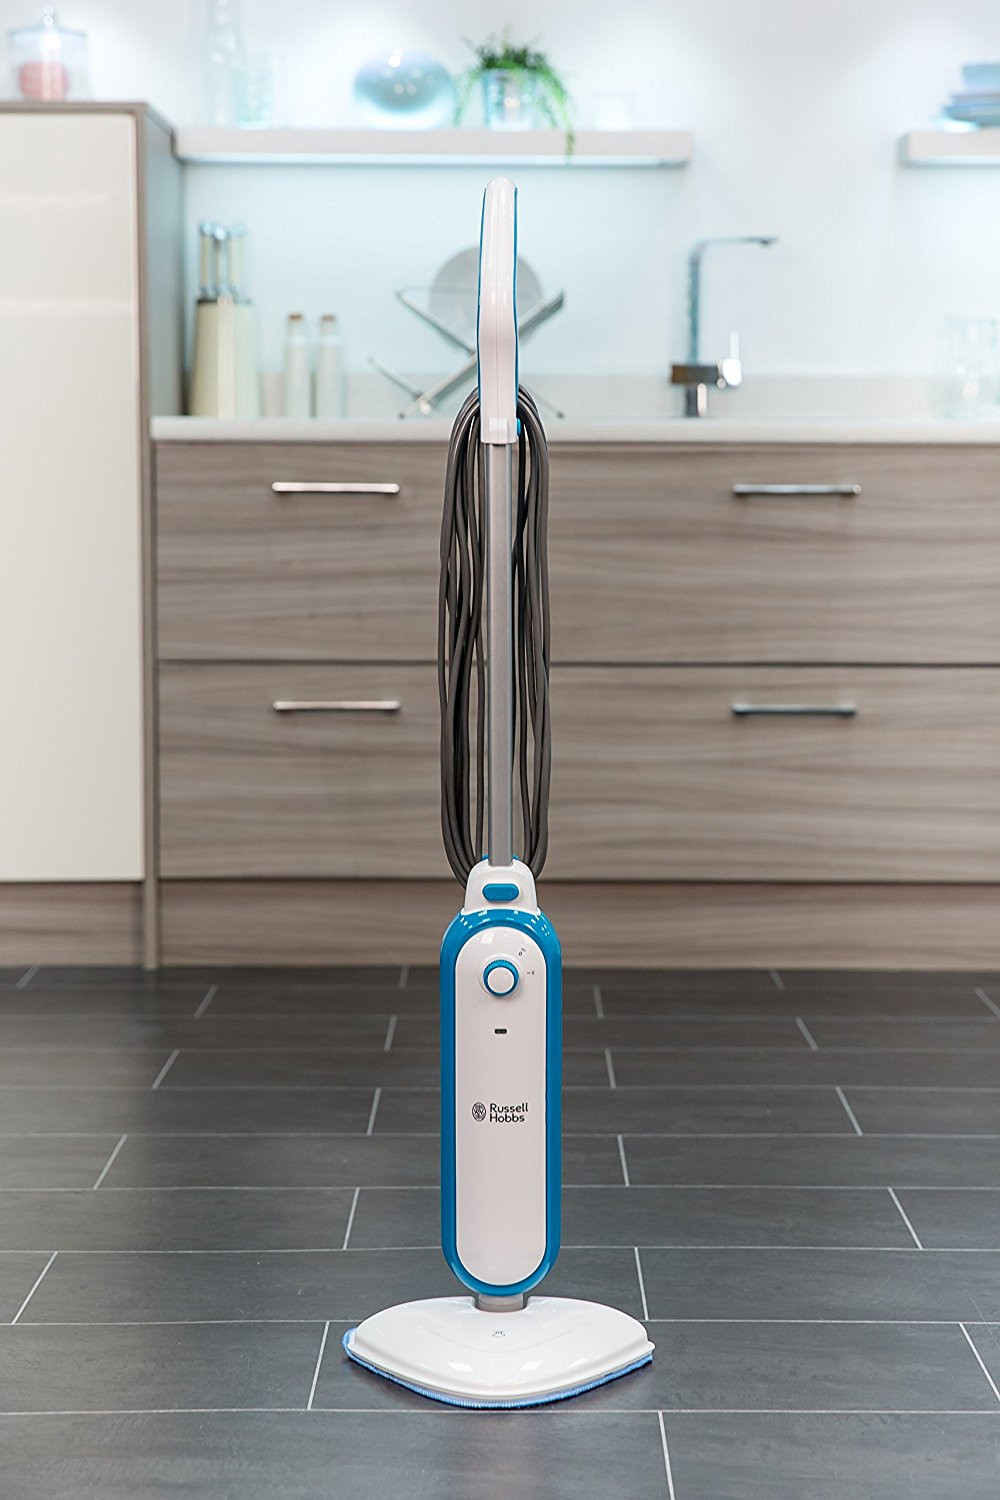 steam cleaner for hardwood floors and carpet of russell hobbs rhsm1001 steam and clean steam mop white aqua free with regard to russell hobbs rhsm1001 steam and clean steam mop white aqua free 2 year guarantee amazon co uk kitchen home